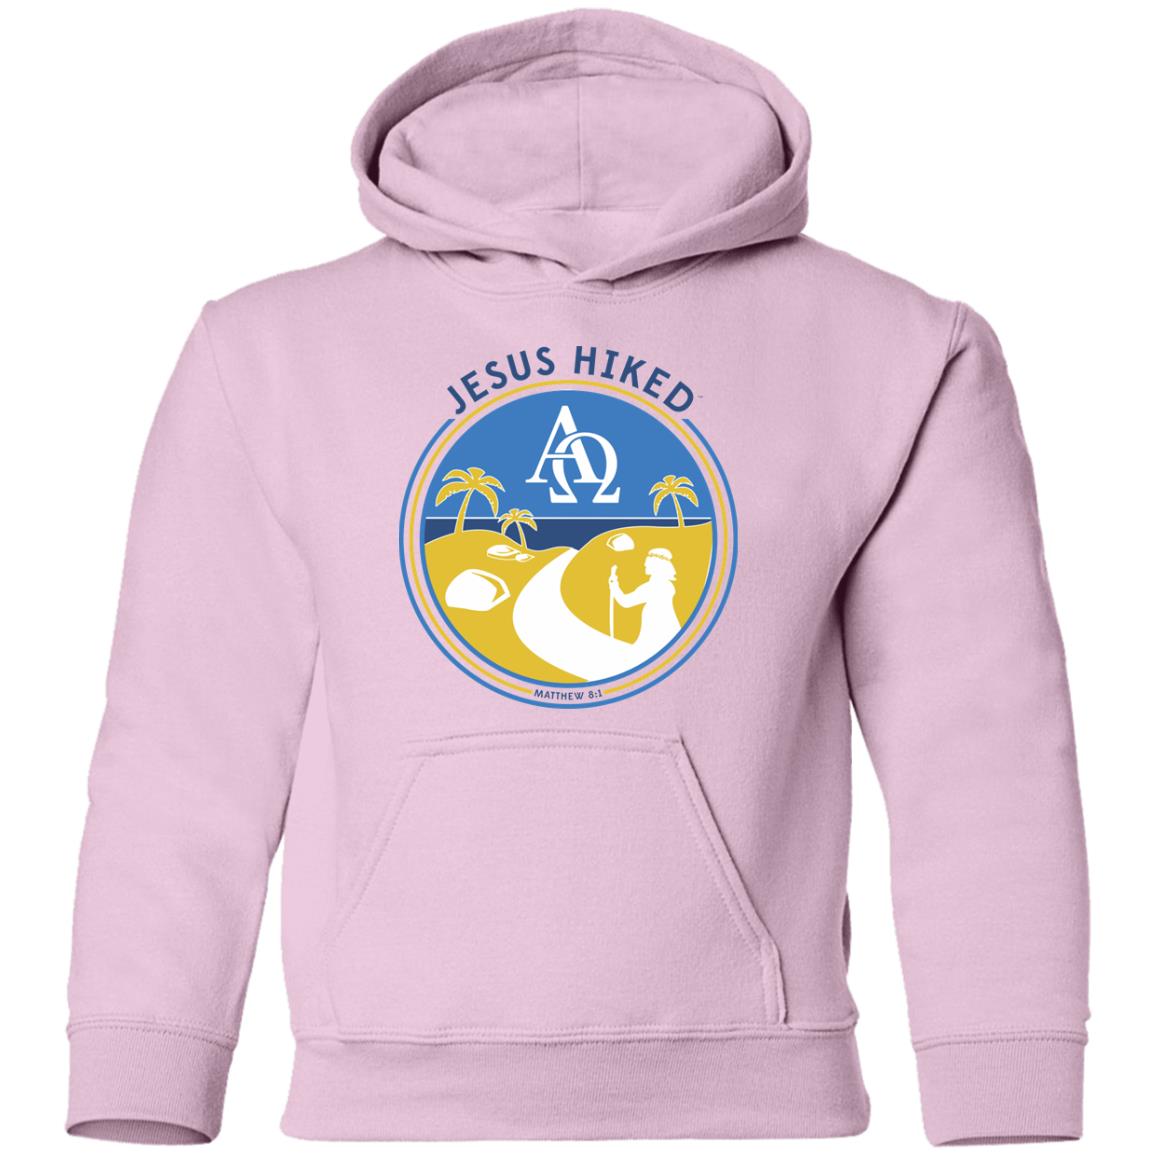 Follow the Path Boy's/Girl's Youth Cotton Hoodie